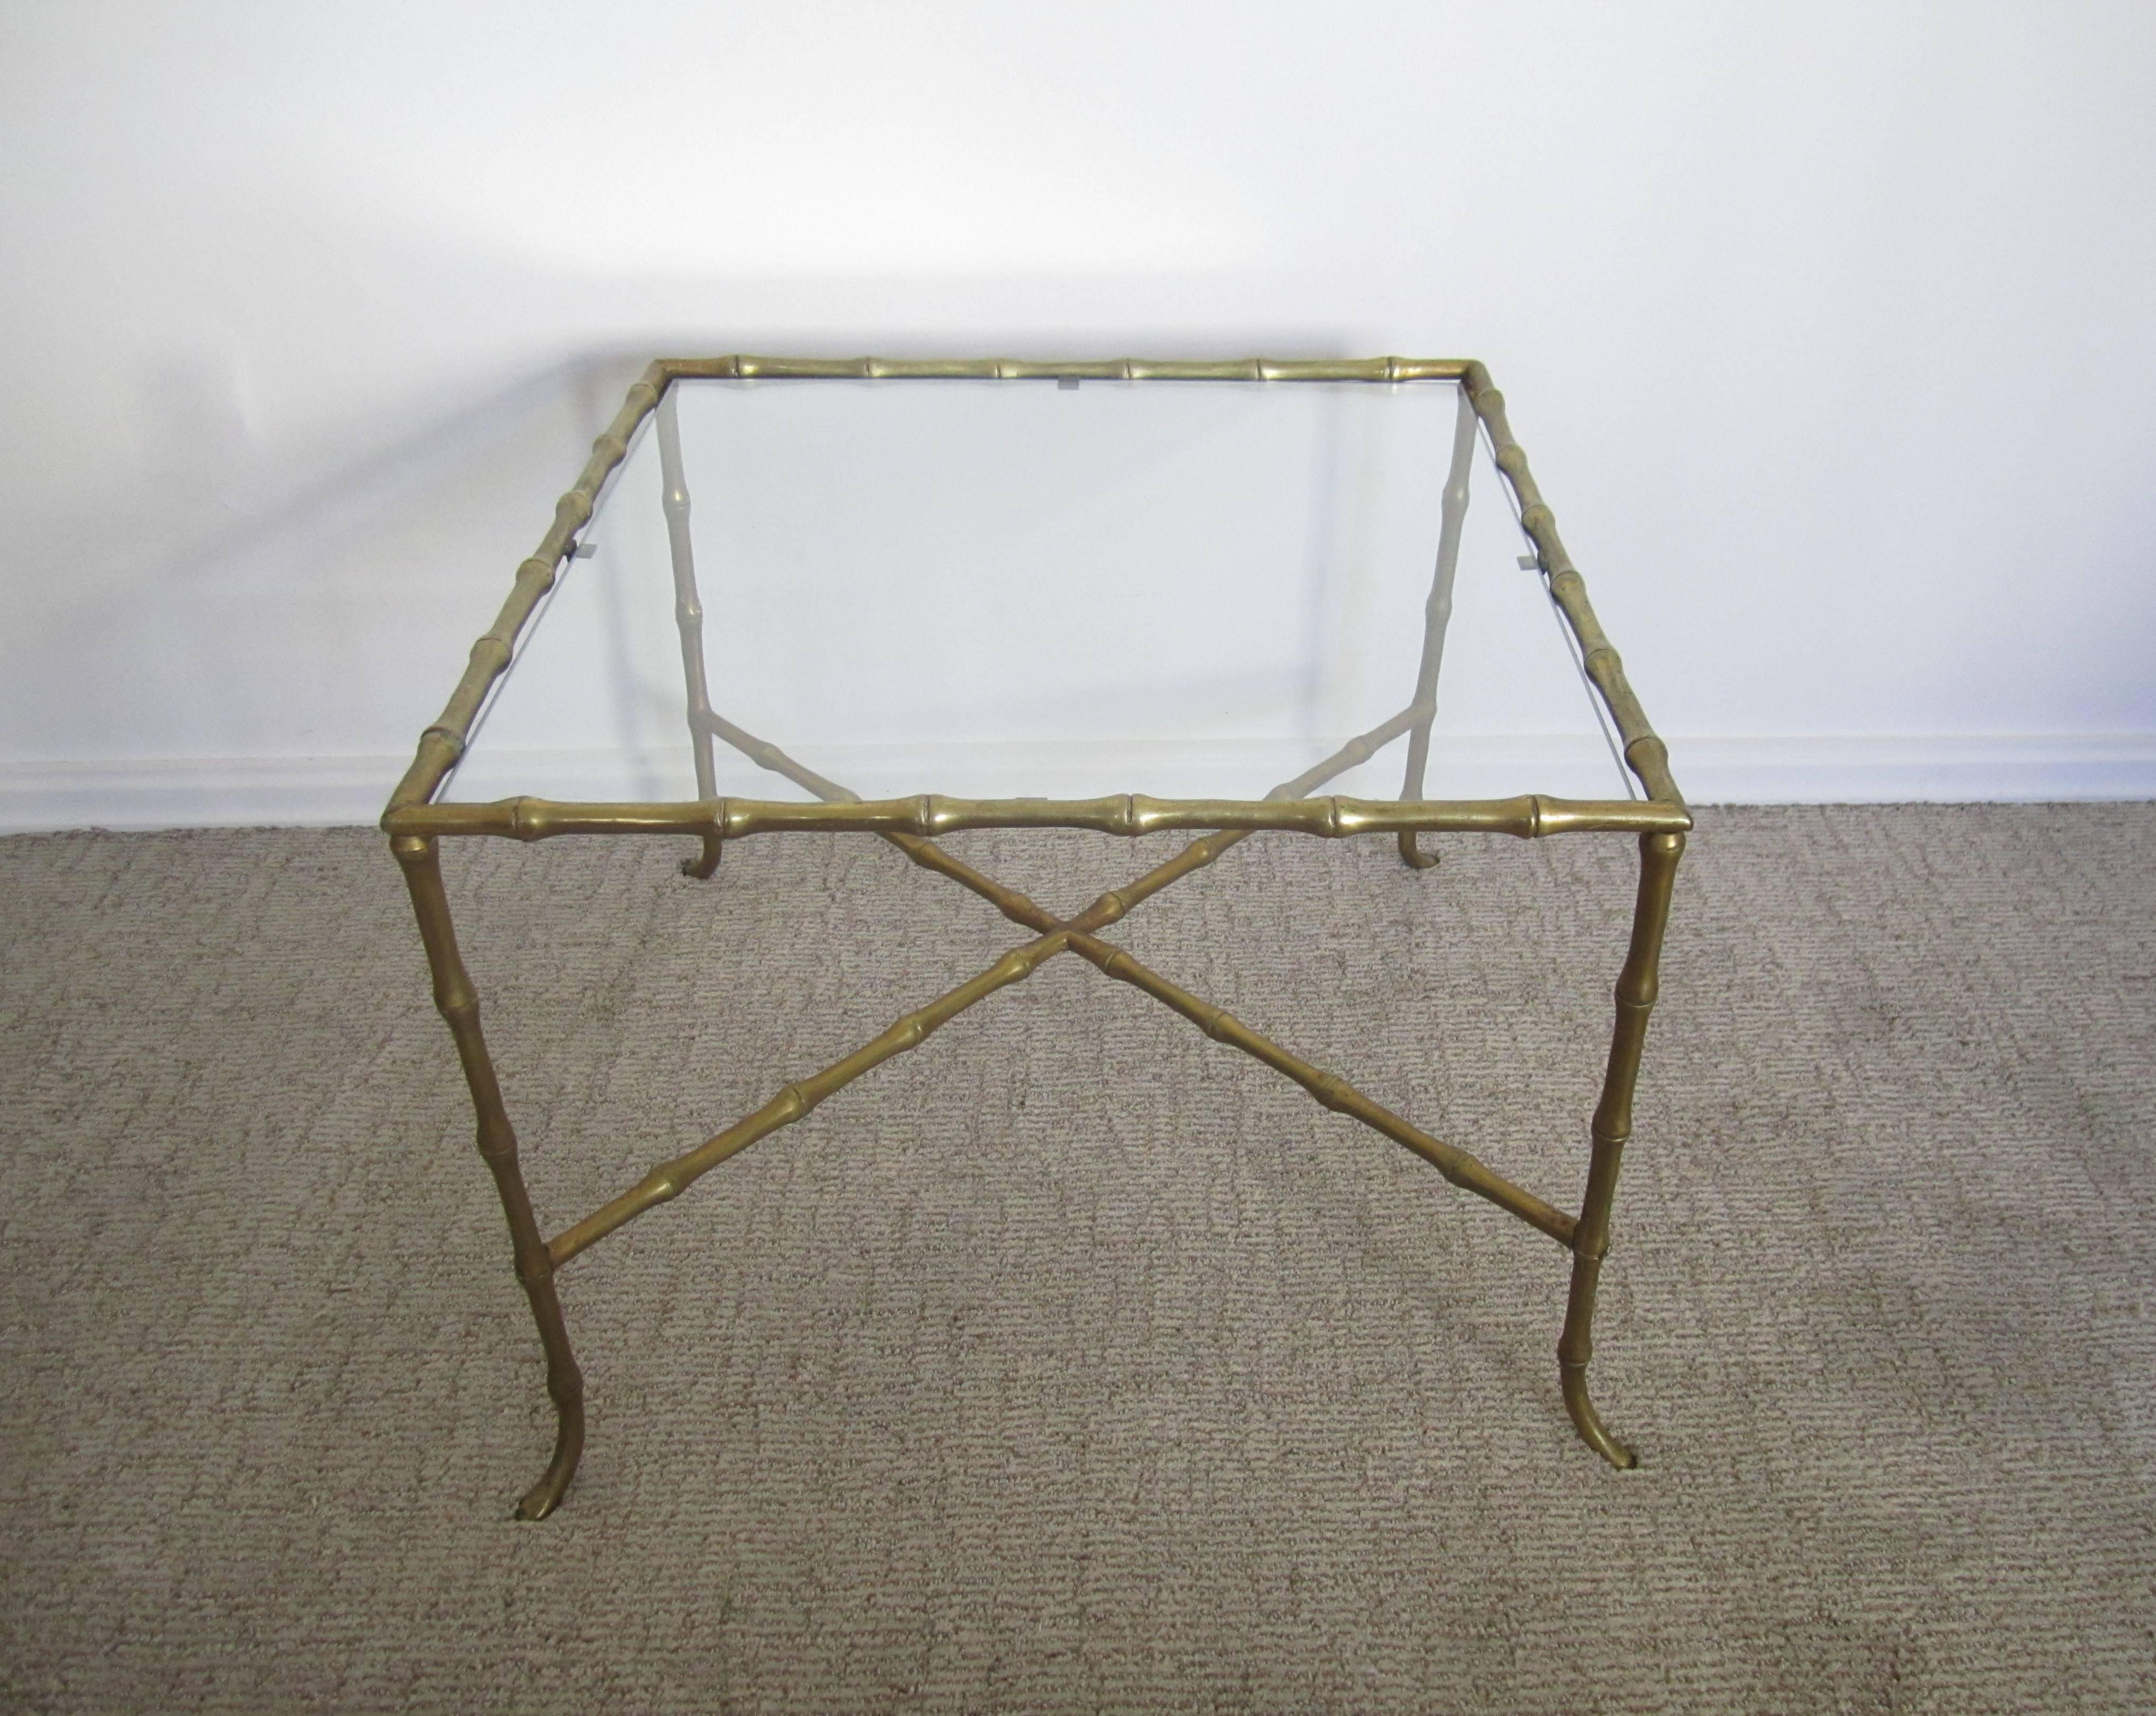 A substantial brass and glass end or side table with 'bamboo' frame, attributed to design house Maison Baguès, France, circa mid-20th century. Frame is solid brass. Table has an 'X' stretcher base and brass screw hardware, finished with an inset